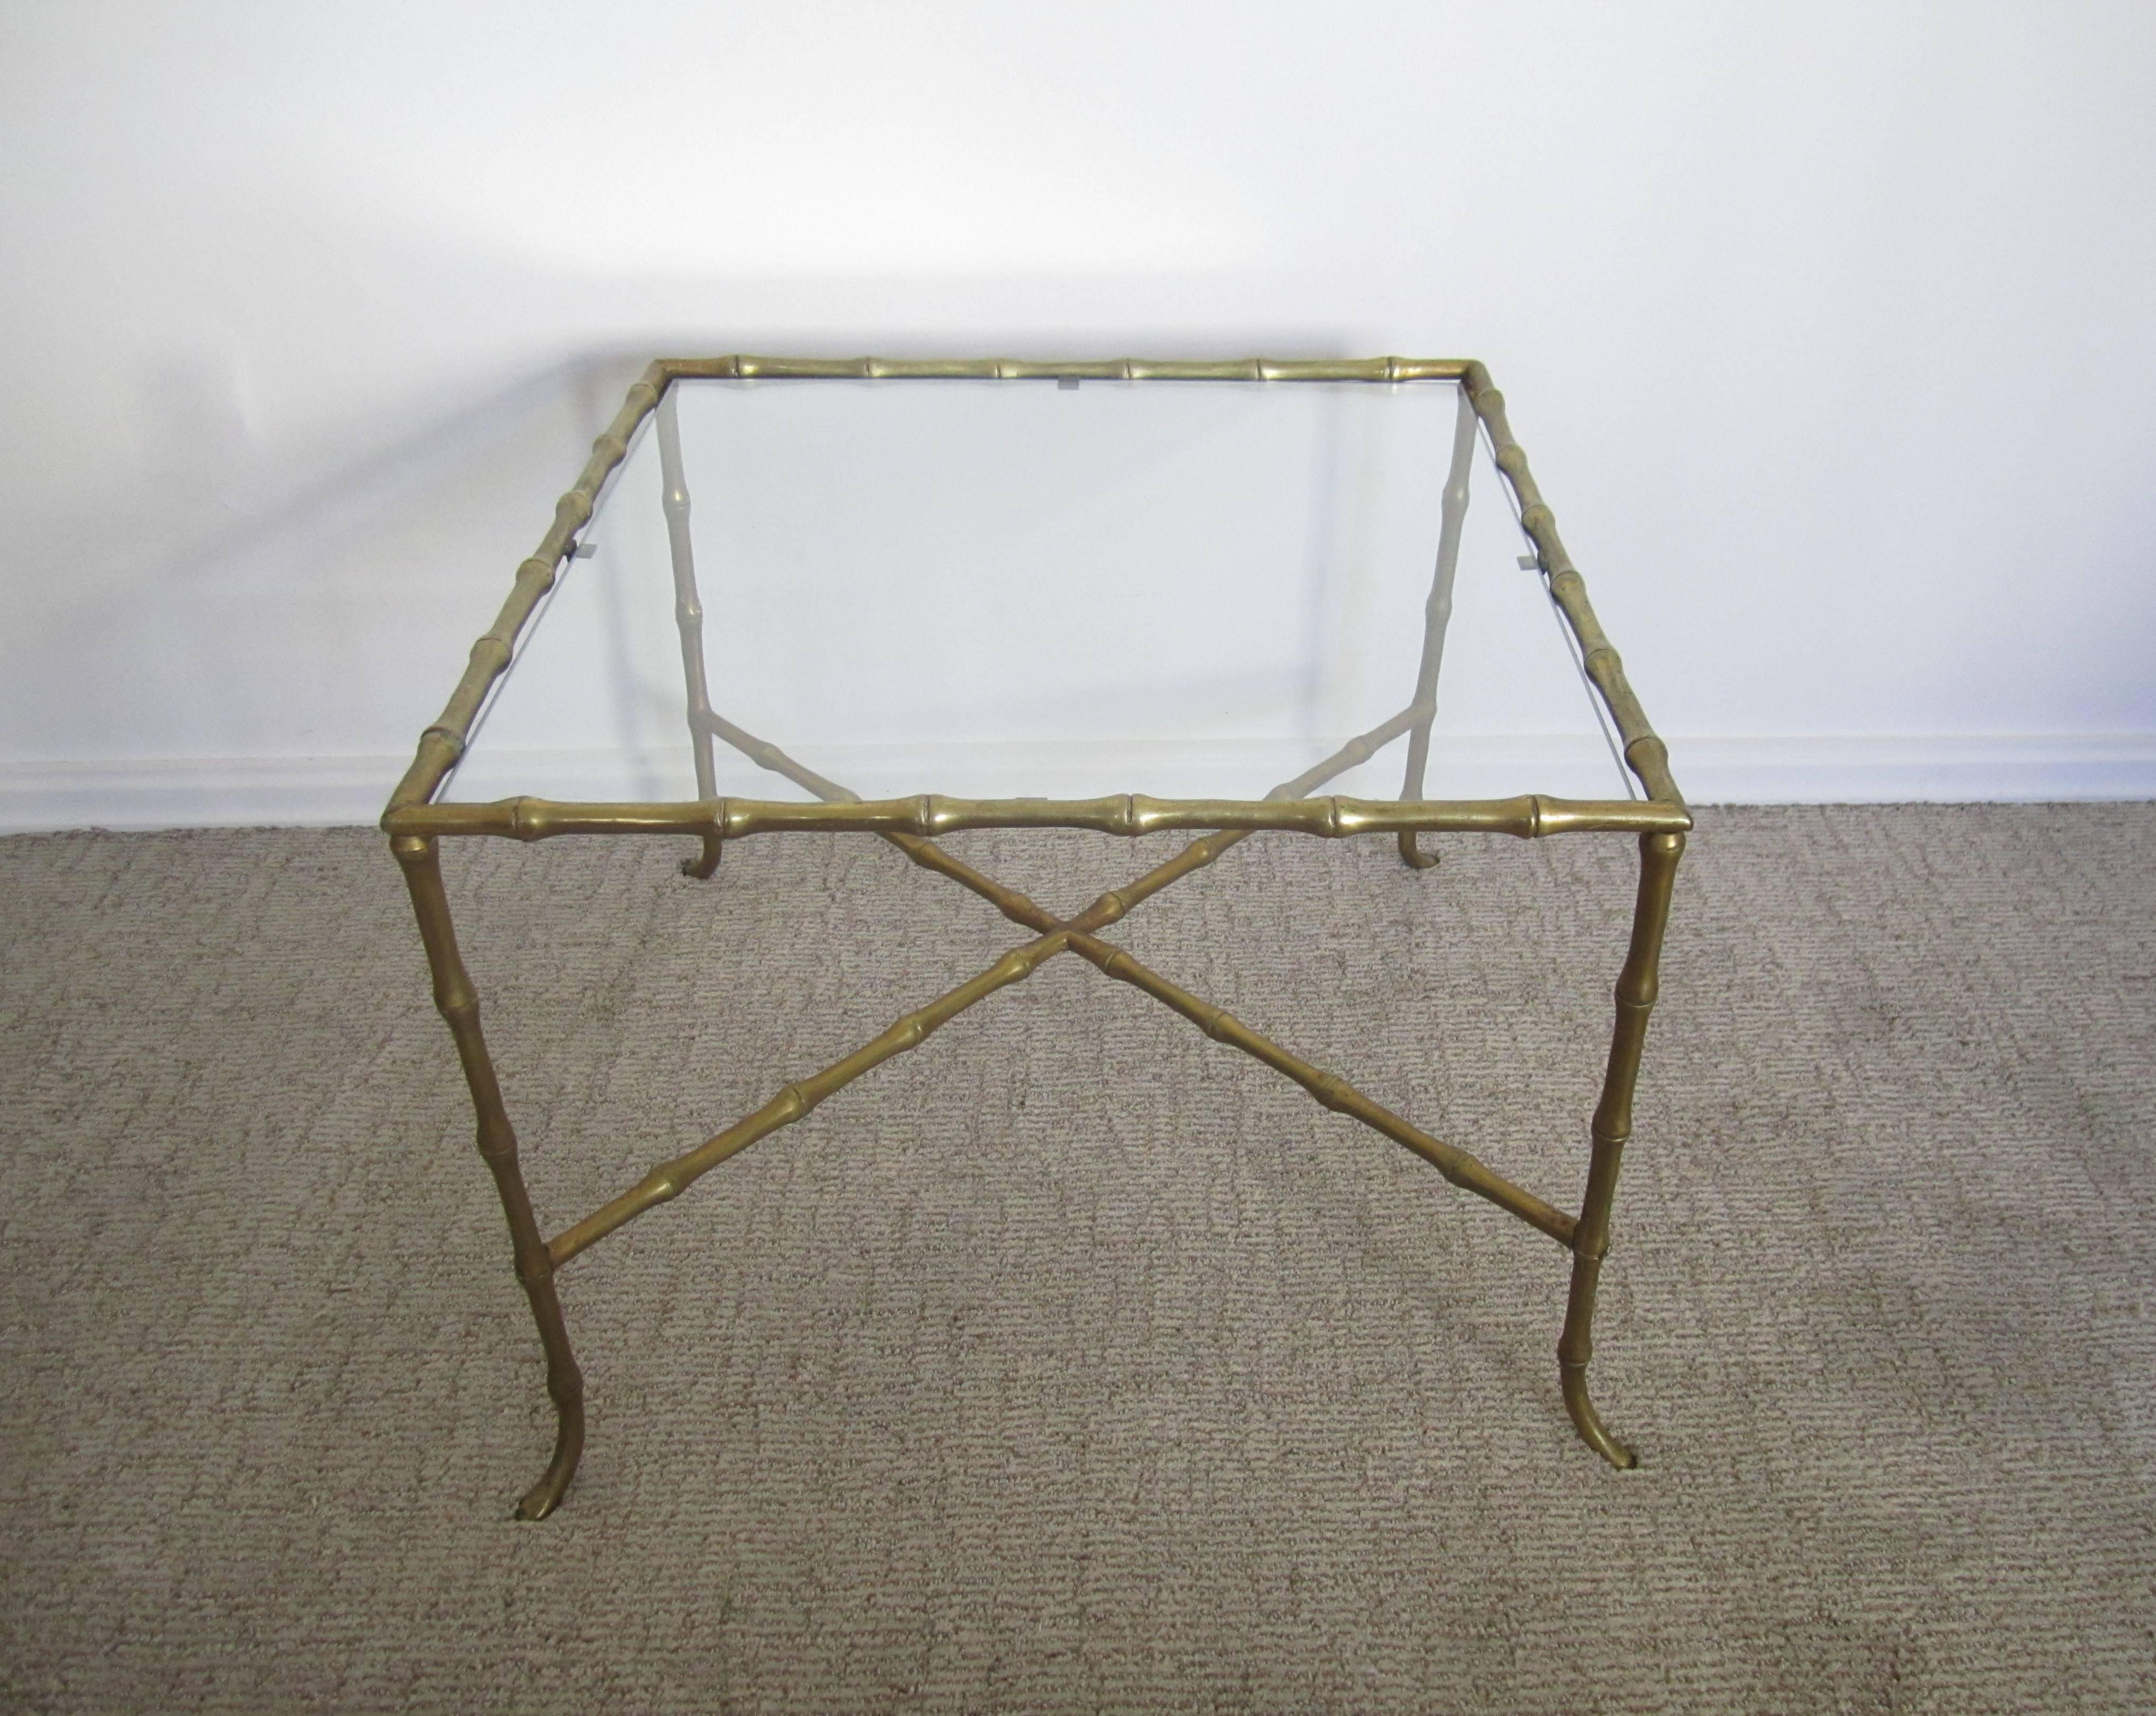 A substantial brass and glass end or side table with 'bamboo' frame, attributed to design house Maison Baguès, France, circa mid-20th century. Frame is solid brass. Table has an 'X' stretcher base and brass screw hardware, finished with an inset